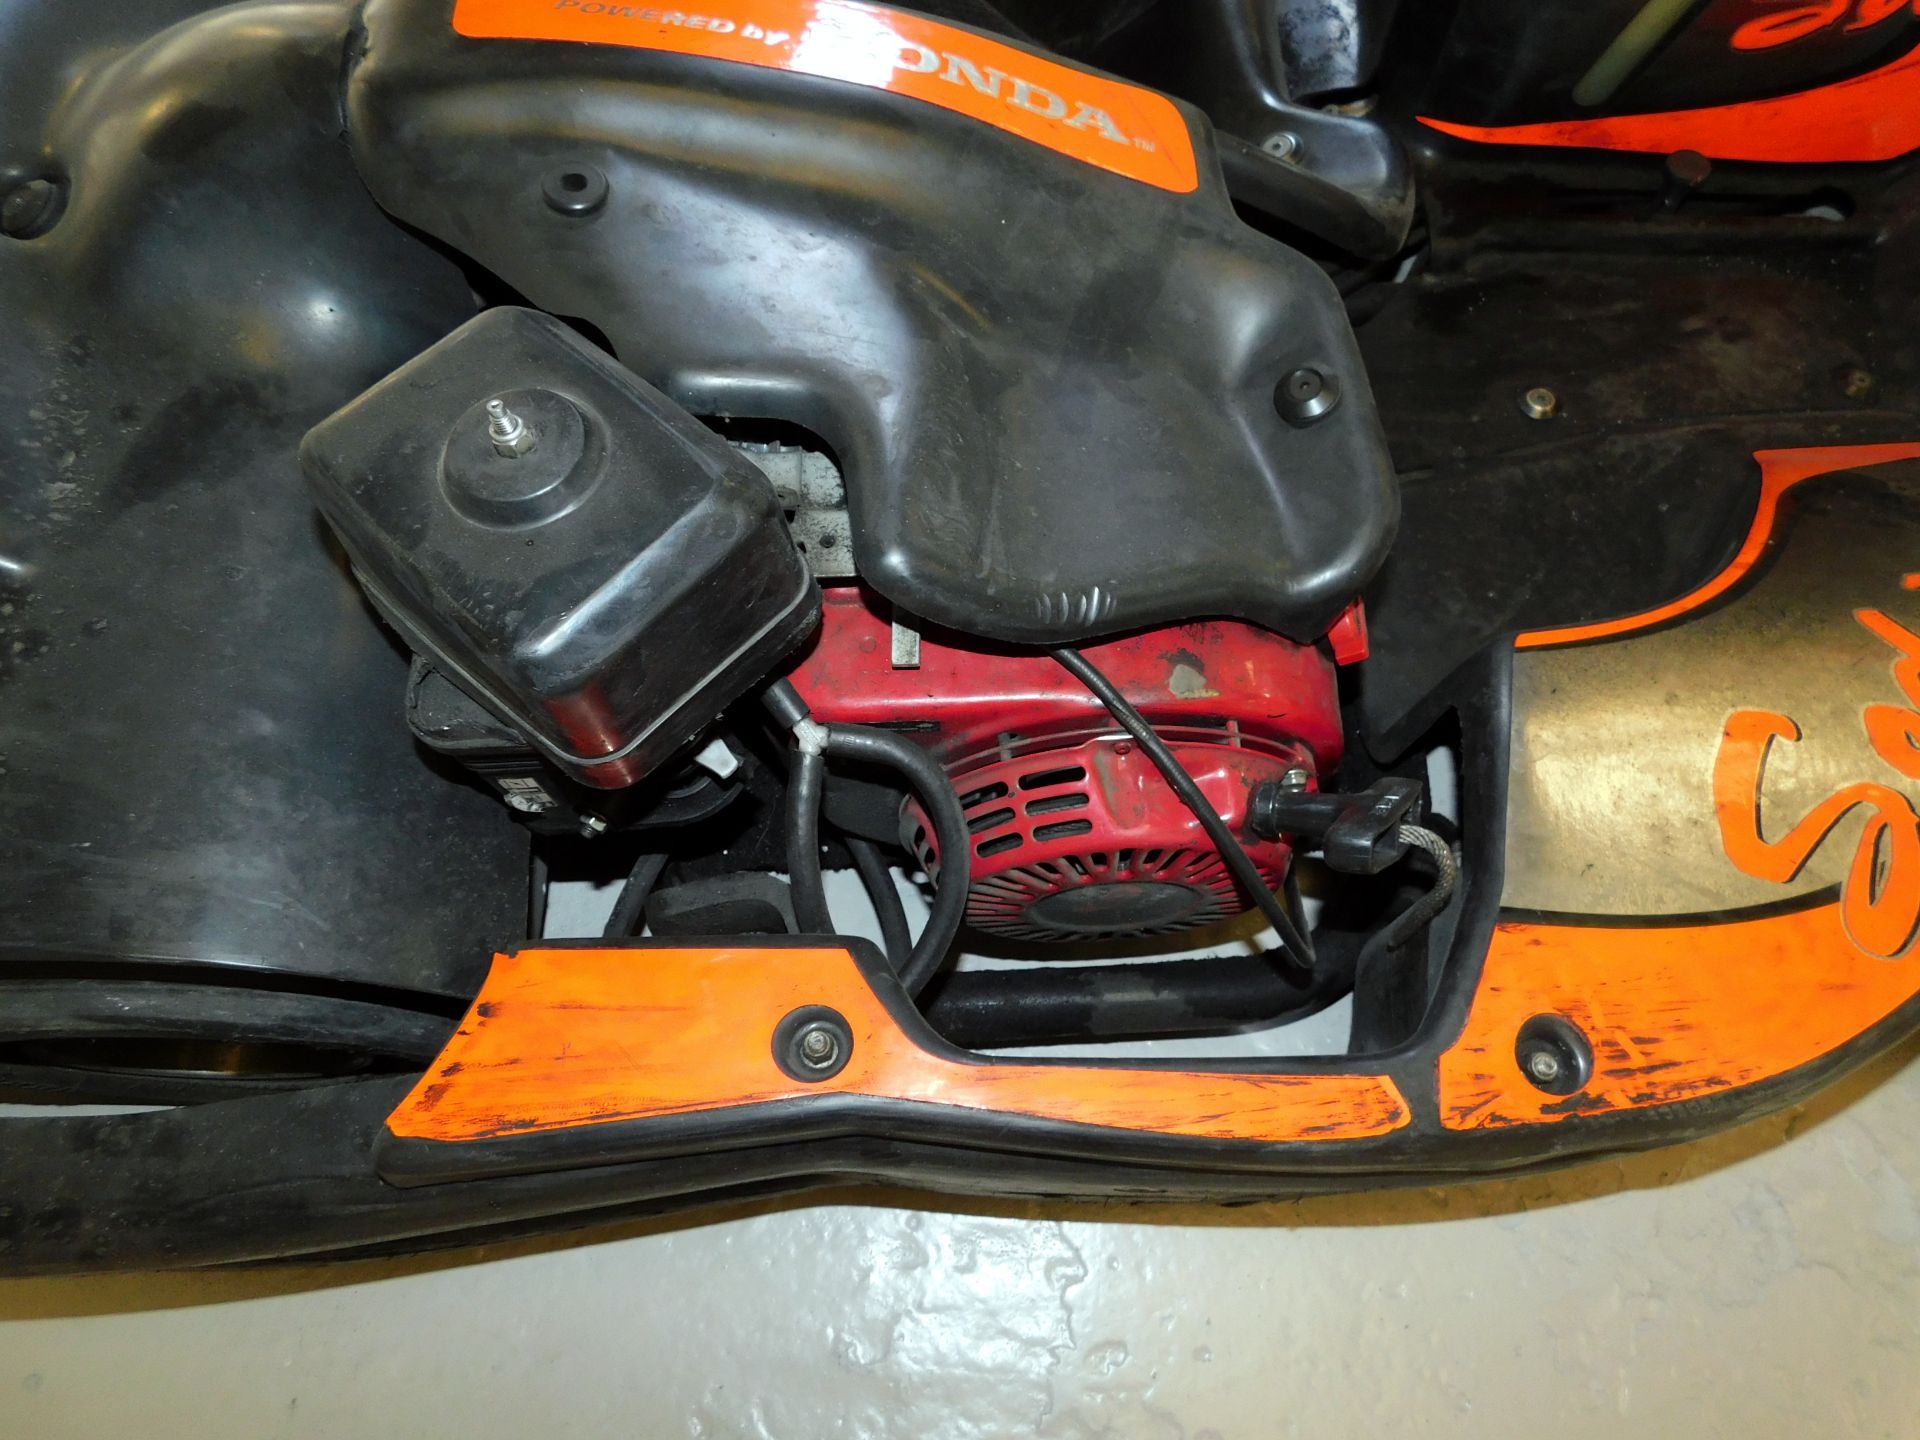 Sodi RX7 Petrol Powered Go-Kart with Honda GX200 Engine (located in Bredbury, collection Friday 20th - Image 5 of 5